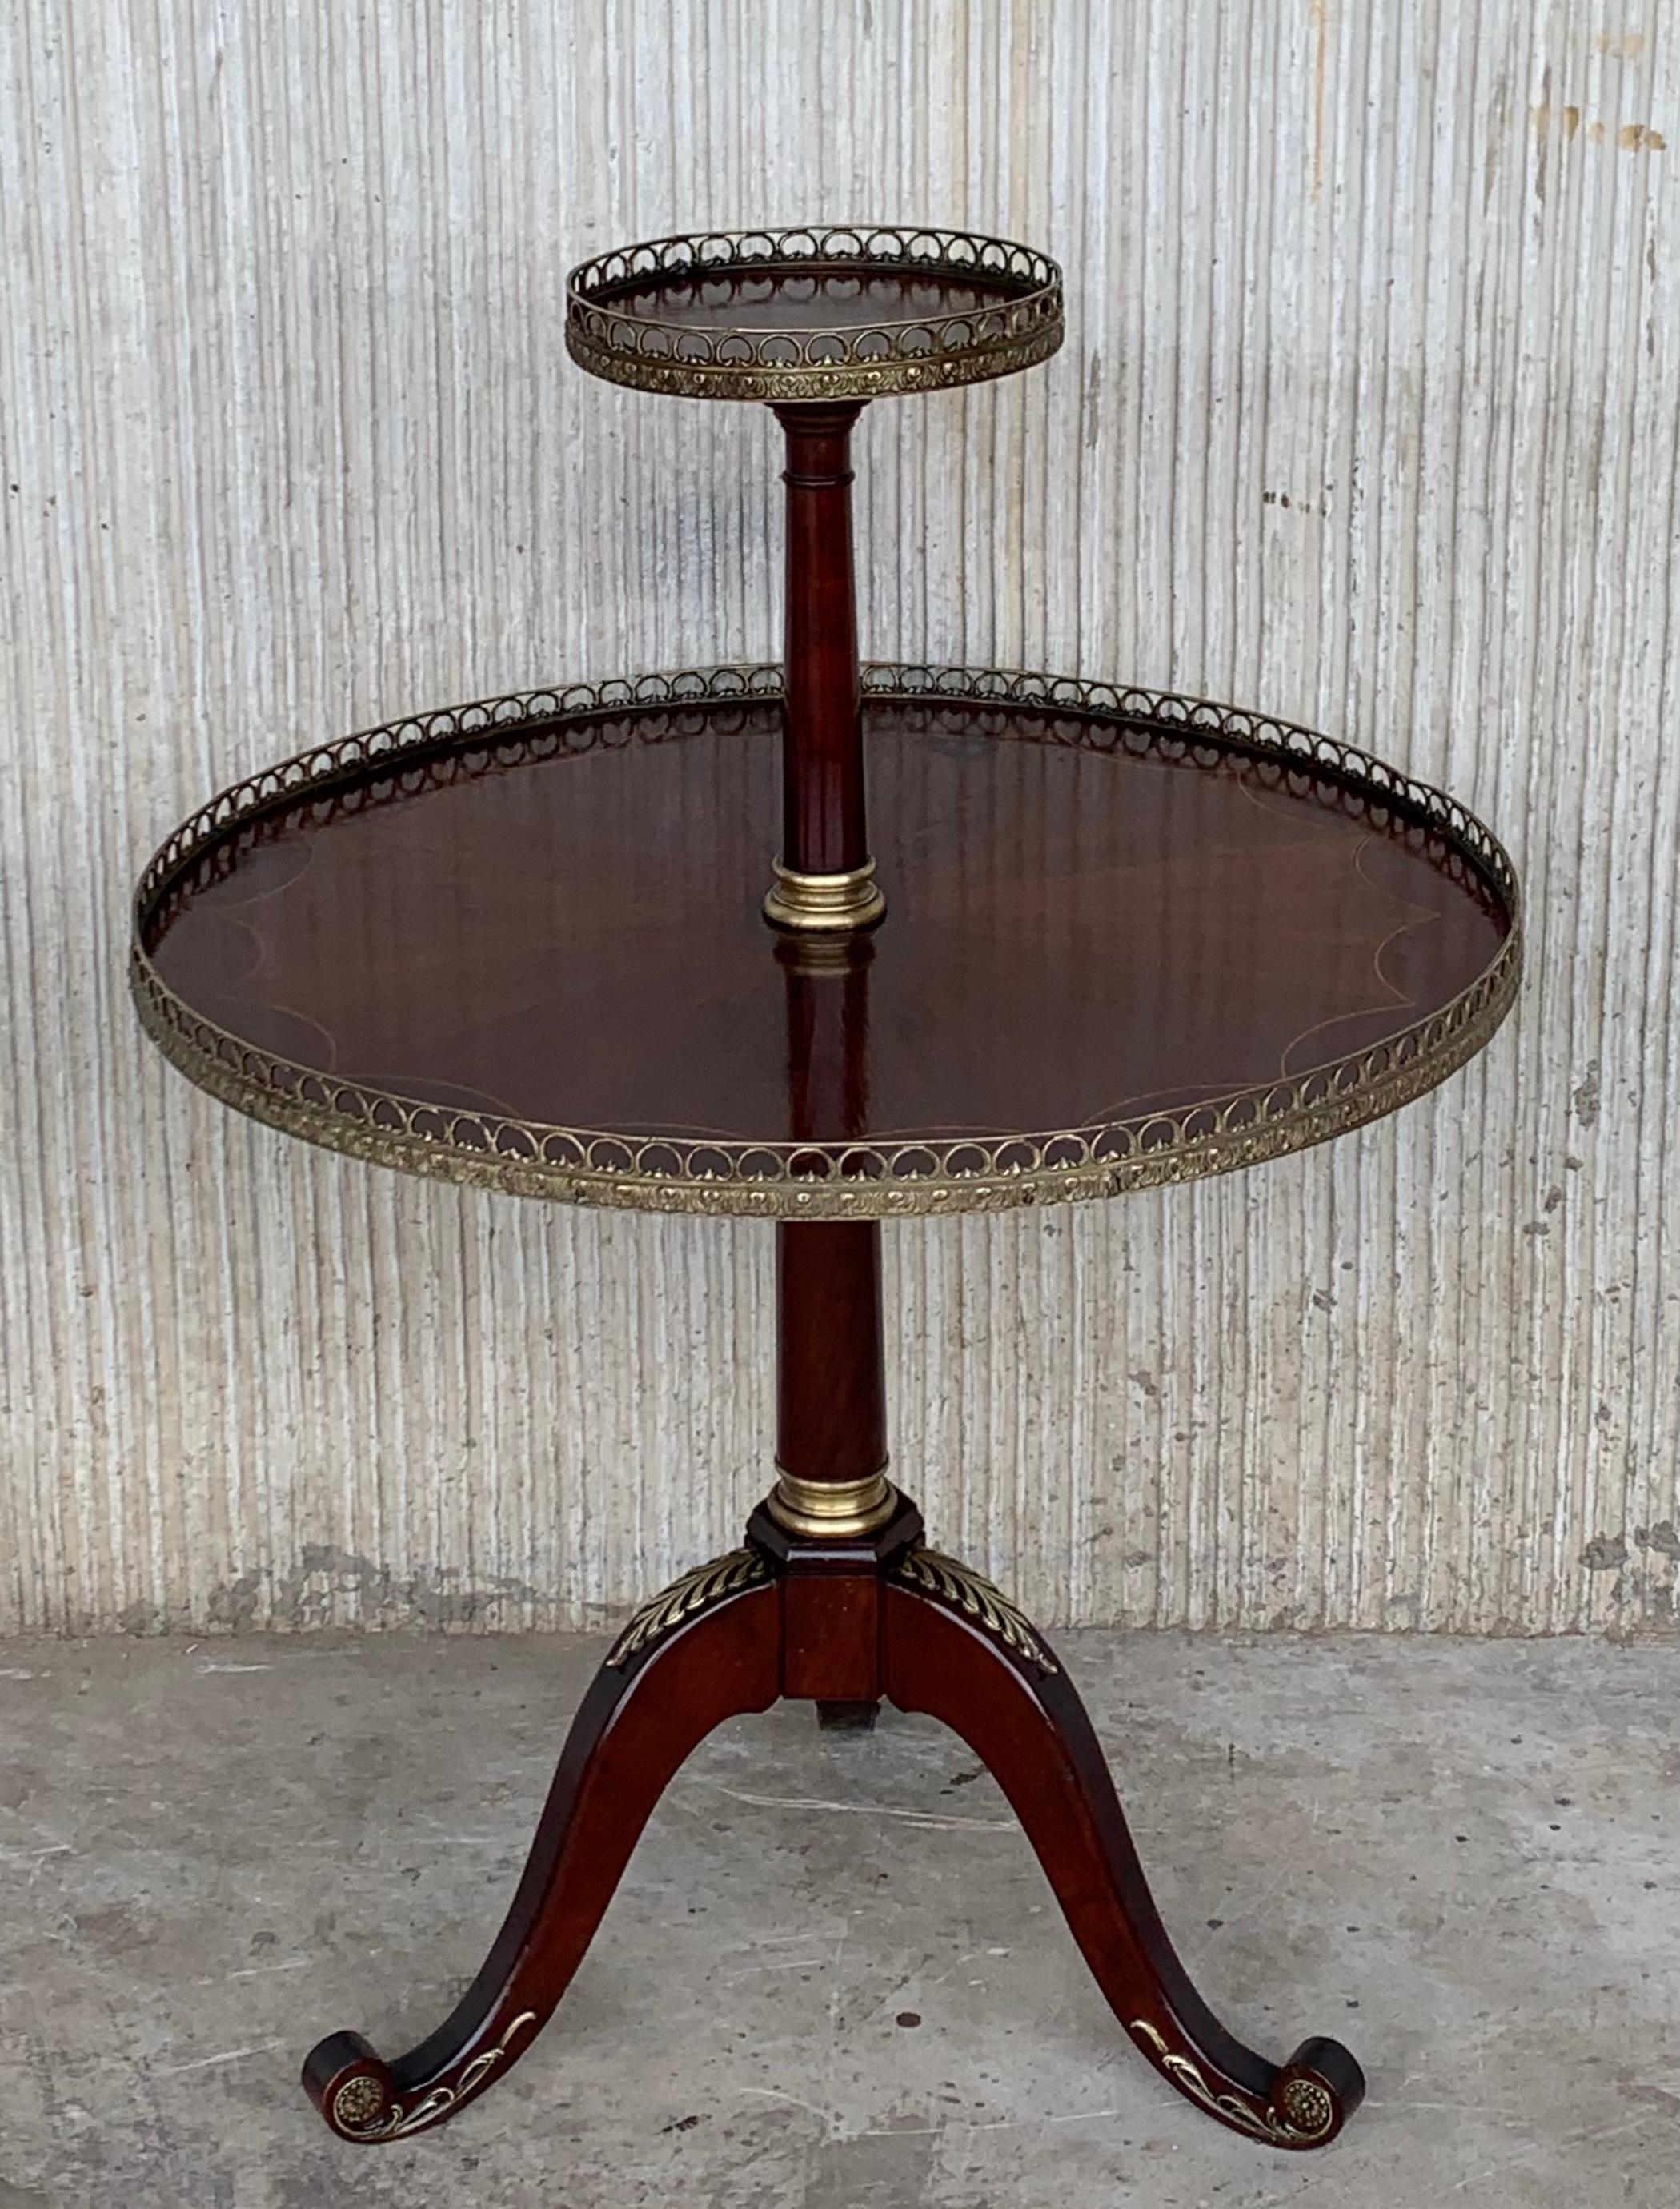 Louis XVI style two-tiered side table from France featuring a sun marquetry on the bottom shelf. Both feature brass galleries and the piece is supported by four tapered legs with bronze feet.

Measure: Height to the low shelve 25.98in.